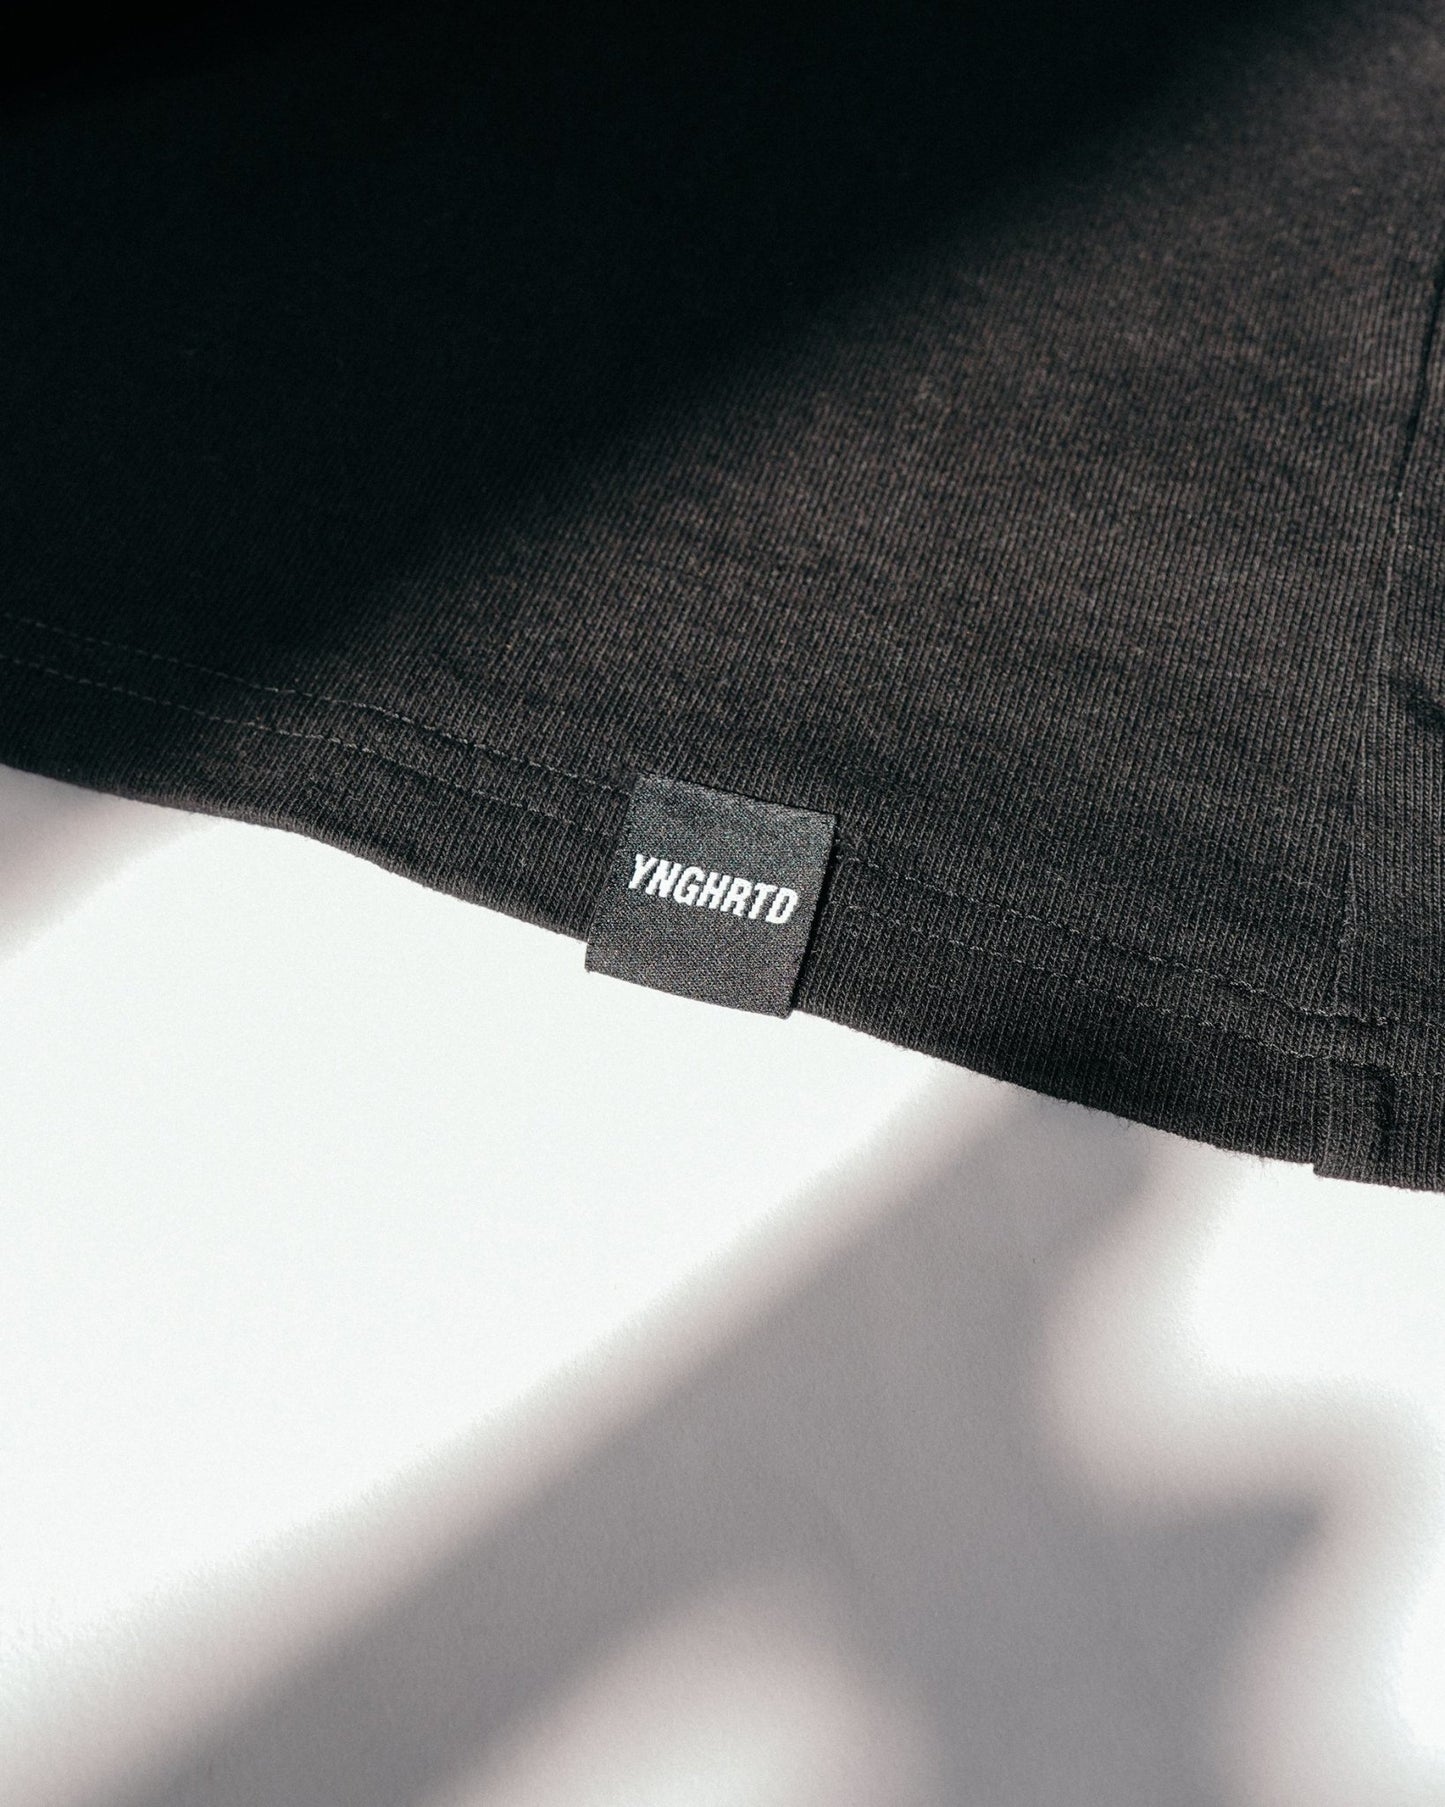 YNGHRTD BENCHMARK SHIRT [PLAIN BLACK] - Younghearted.Clothing @younghearted.cl